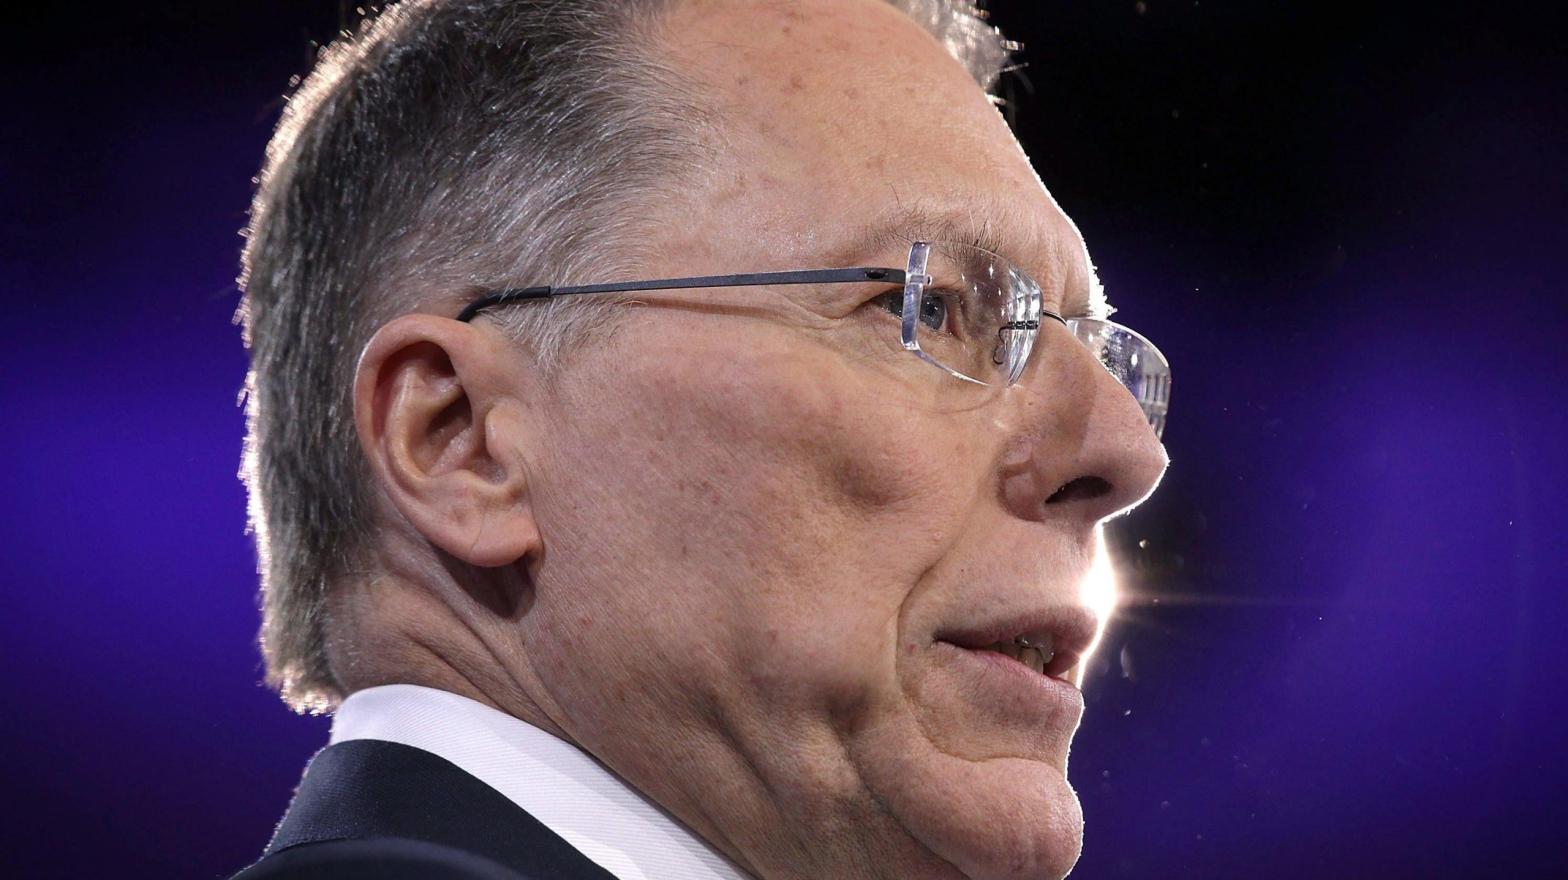 Wayne LaPierre, Executive Vice President of the National Rifle Association, at the Conservative Political Action Conference in March 2016.  (Photo: Alex Wong, Getty Images)